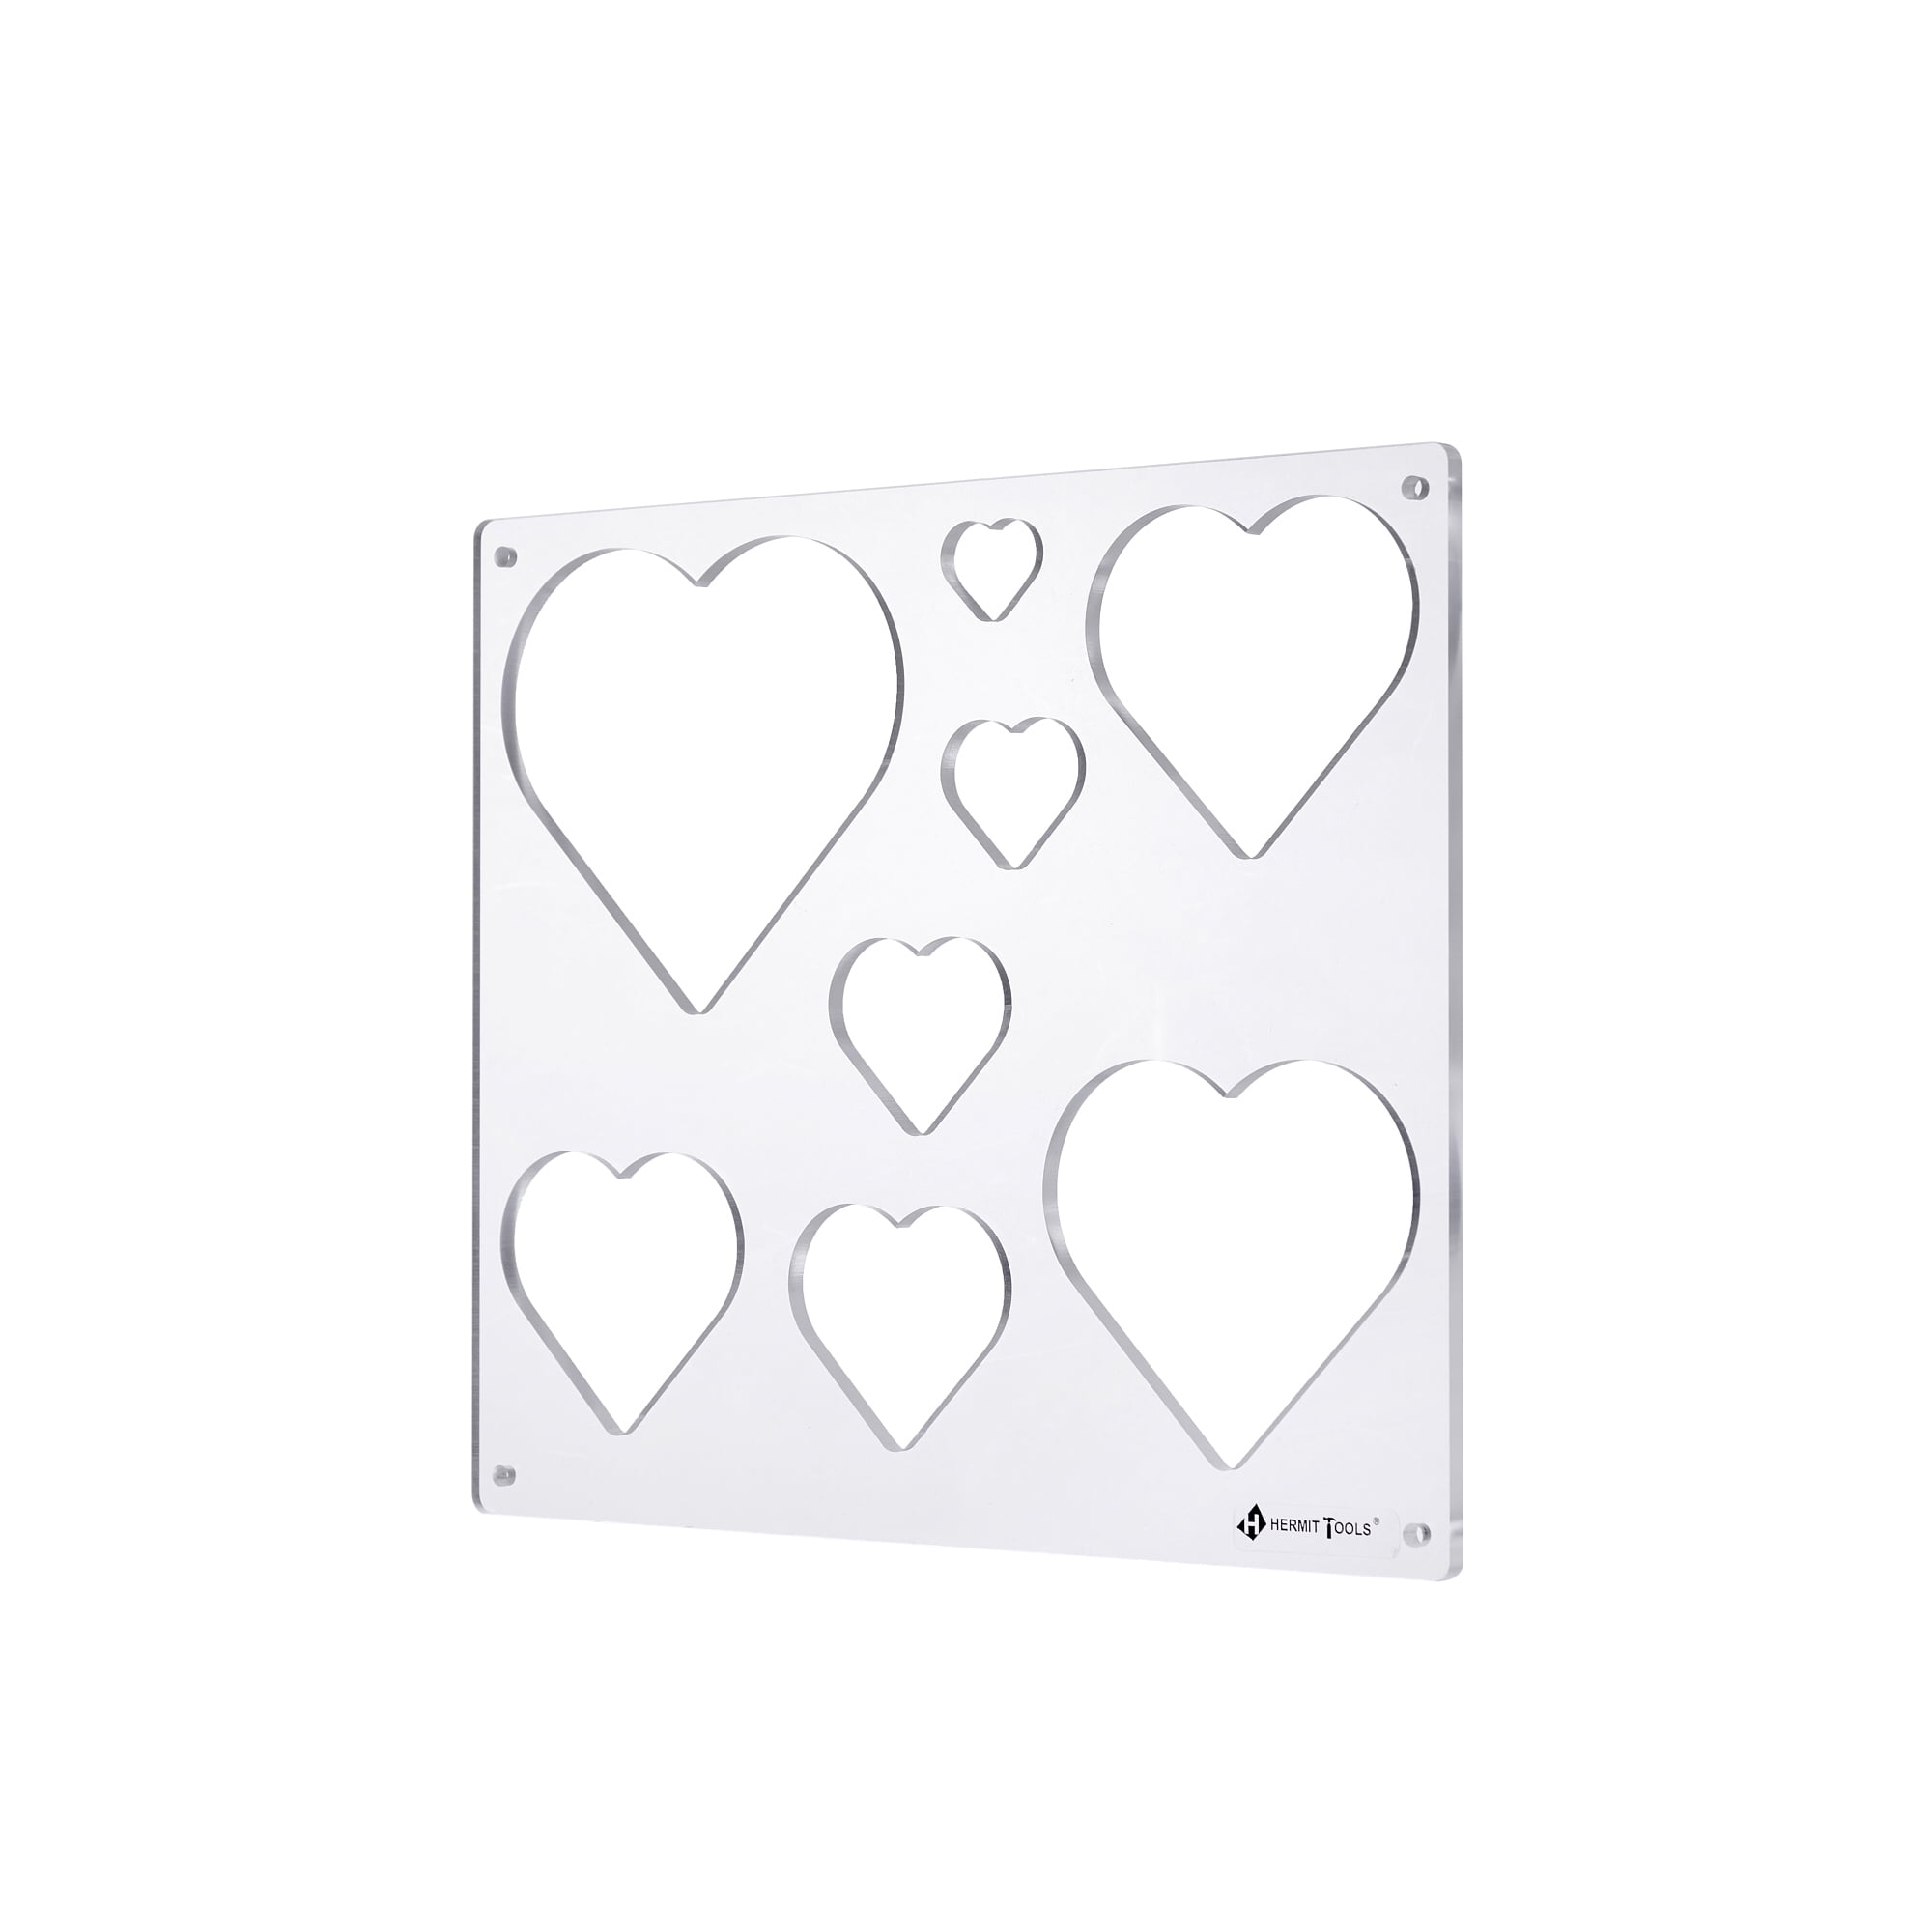 21 in 2 Heart and Triangle Template Inlay Template, Decorative and